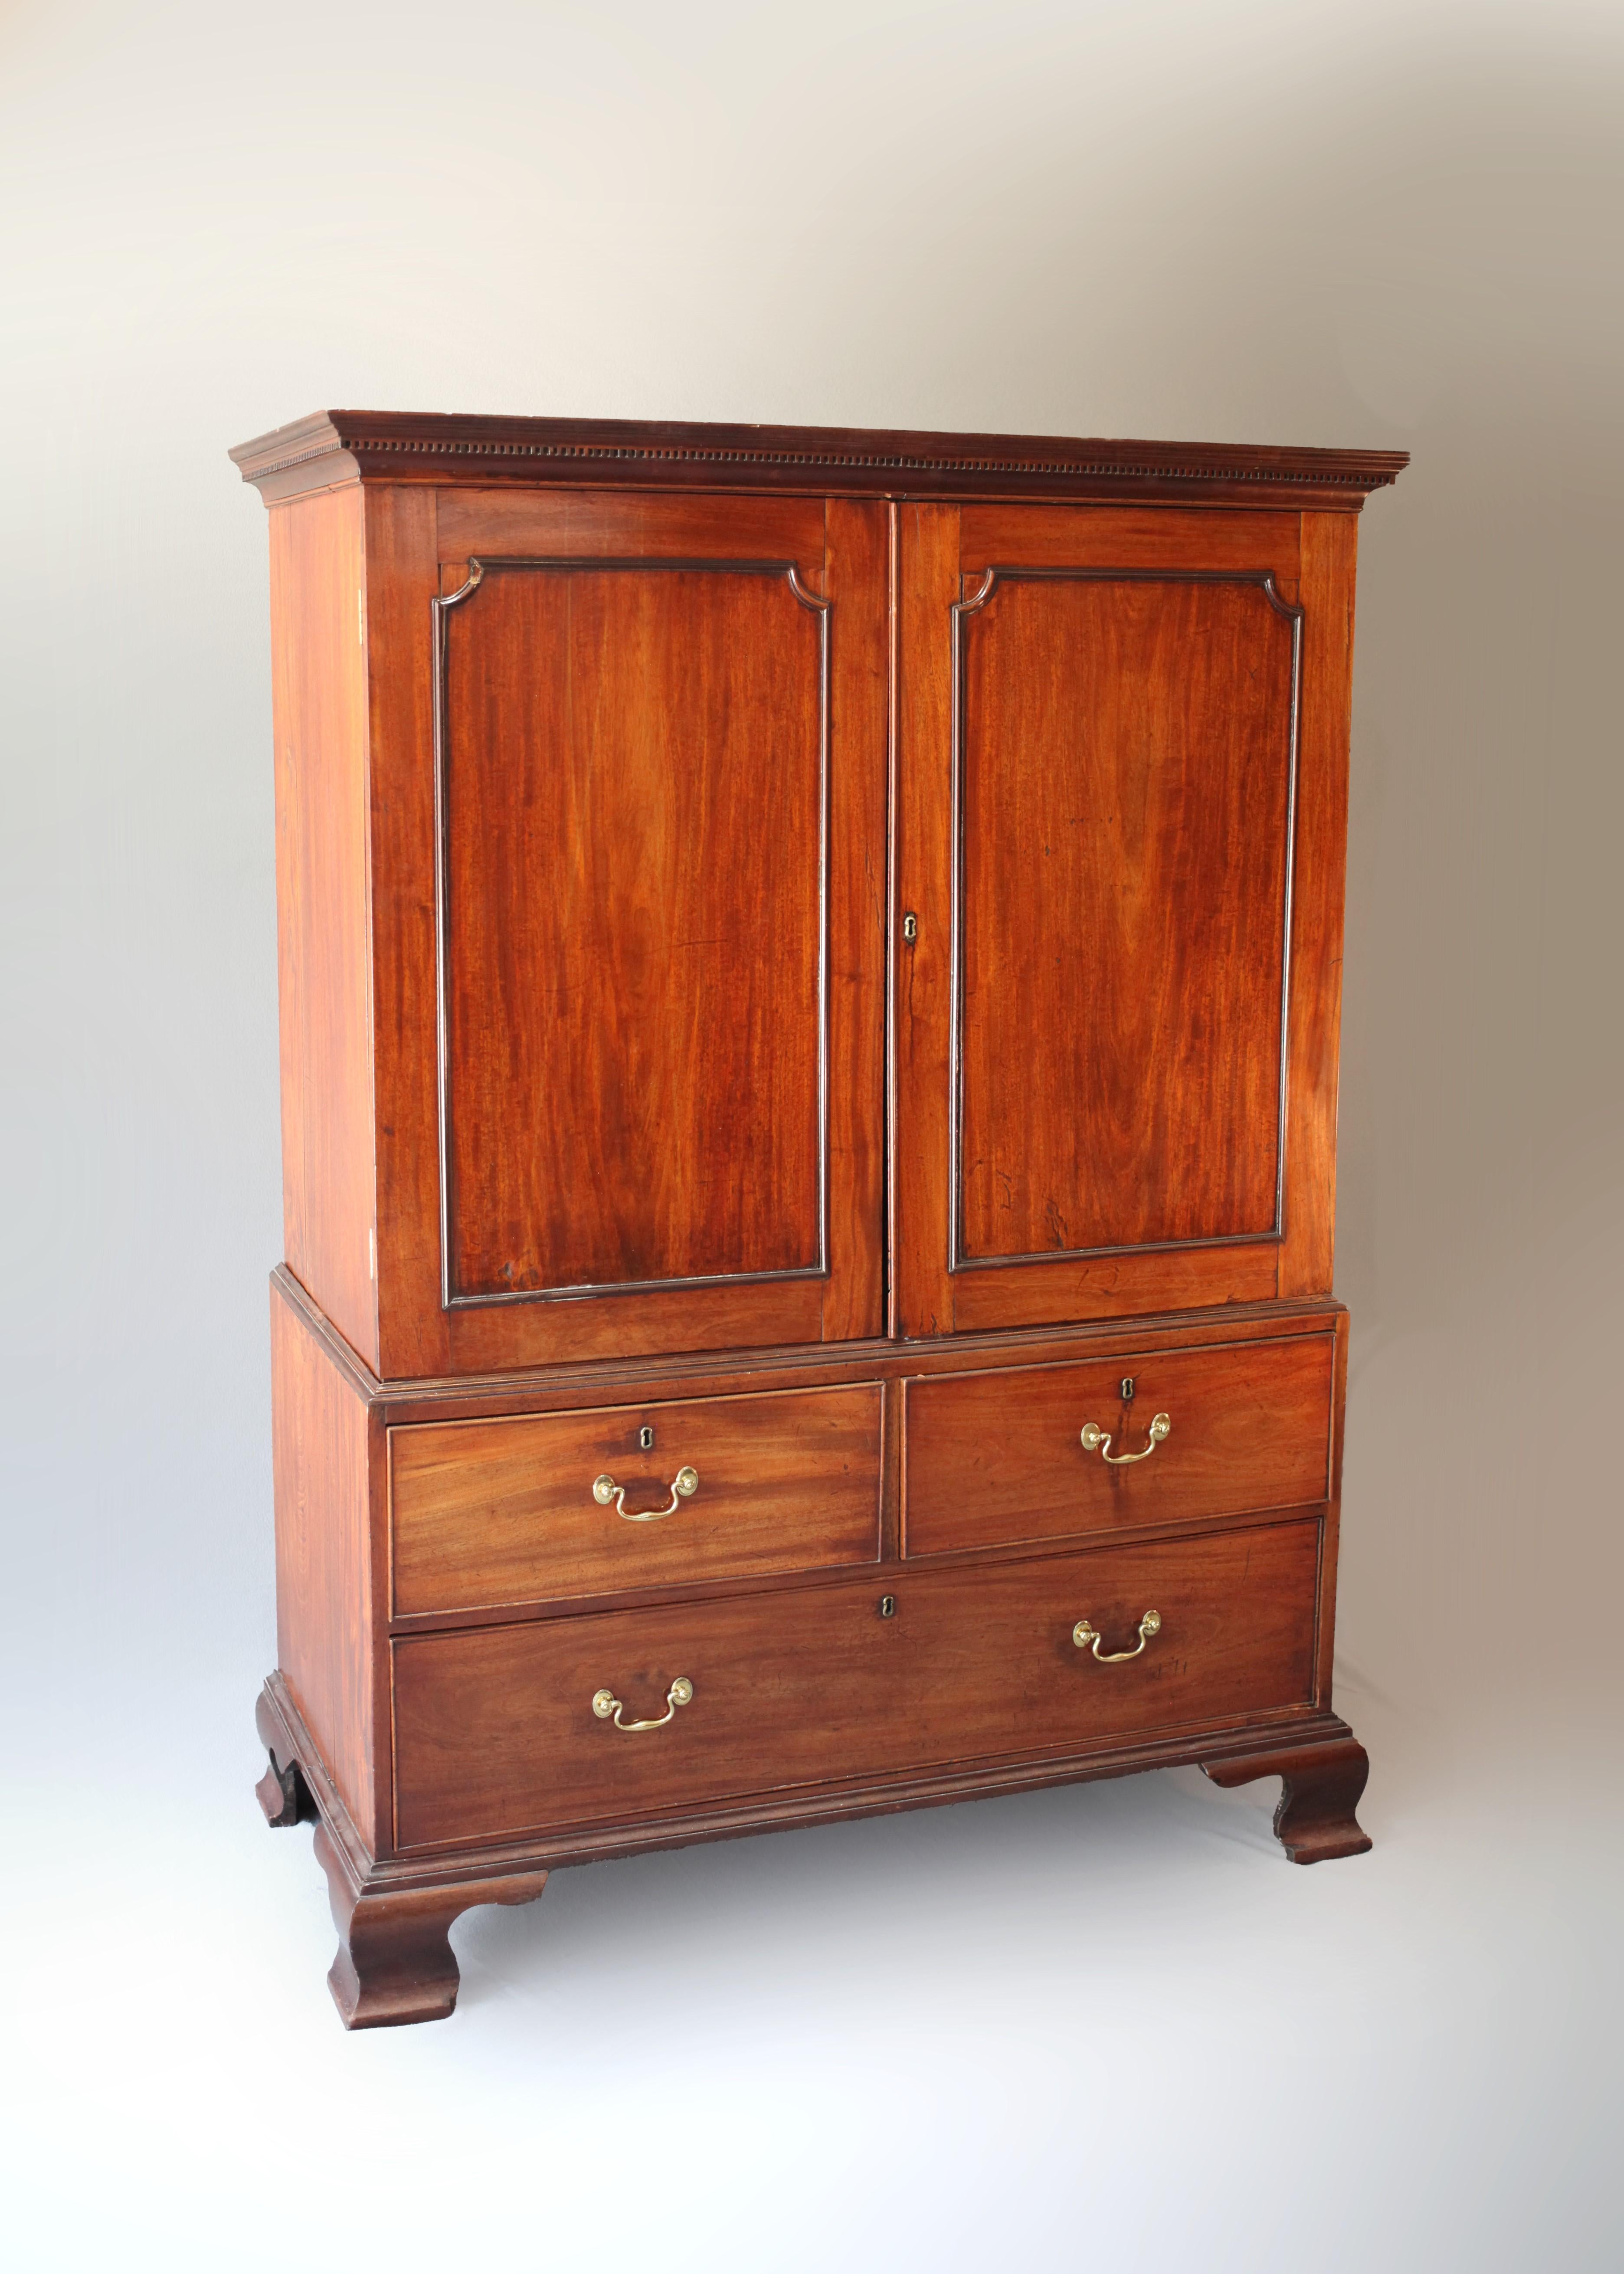 An embodiment of elegance and functionality, this late 18th-century George III Chippendale Linen Press makes an enthralling addition to any collection. This impressive piece, crafted from rich mahogany, features an upper case with a sophisticated